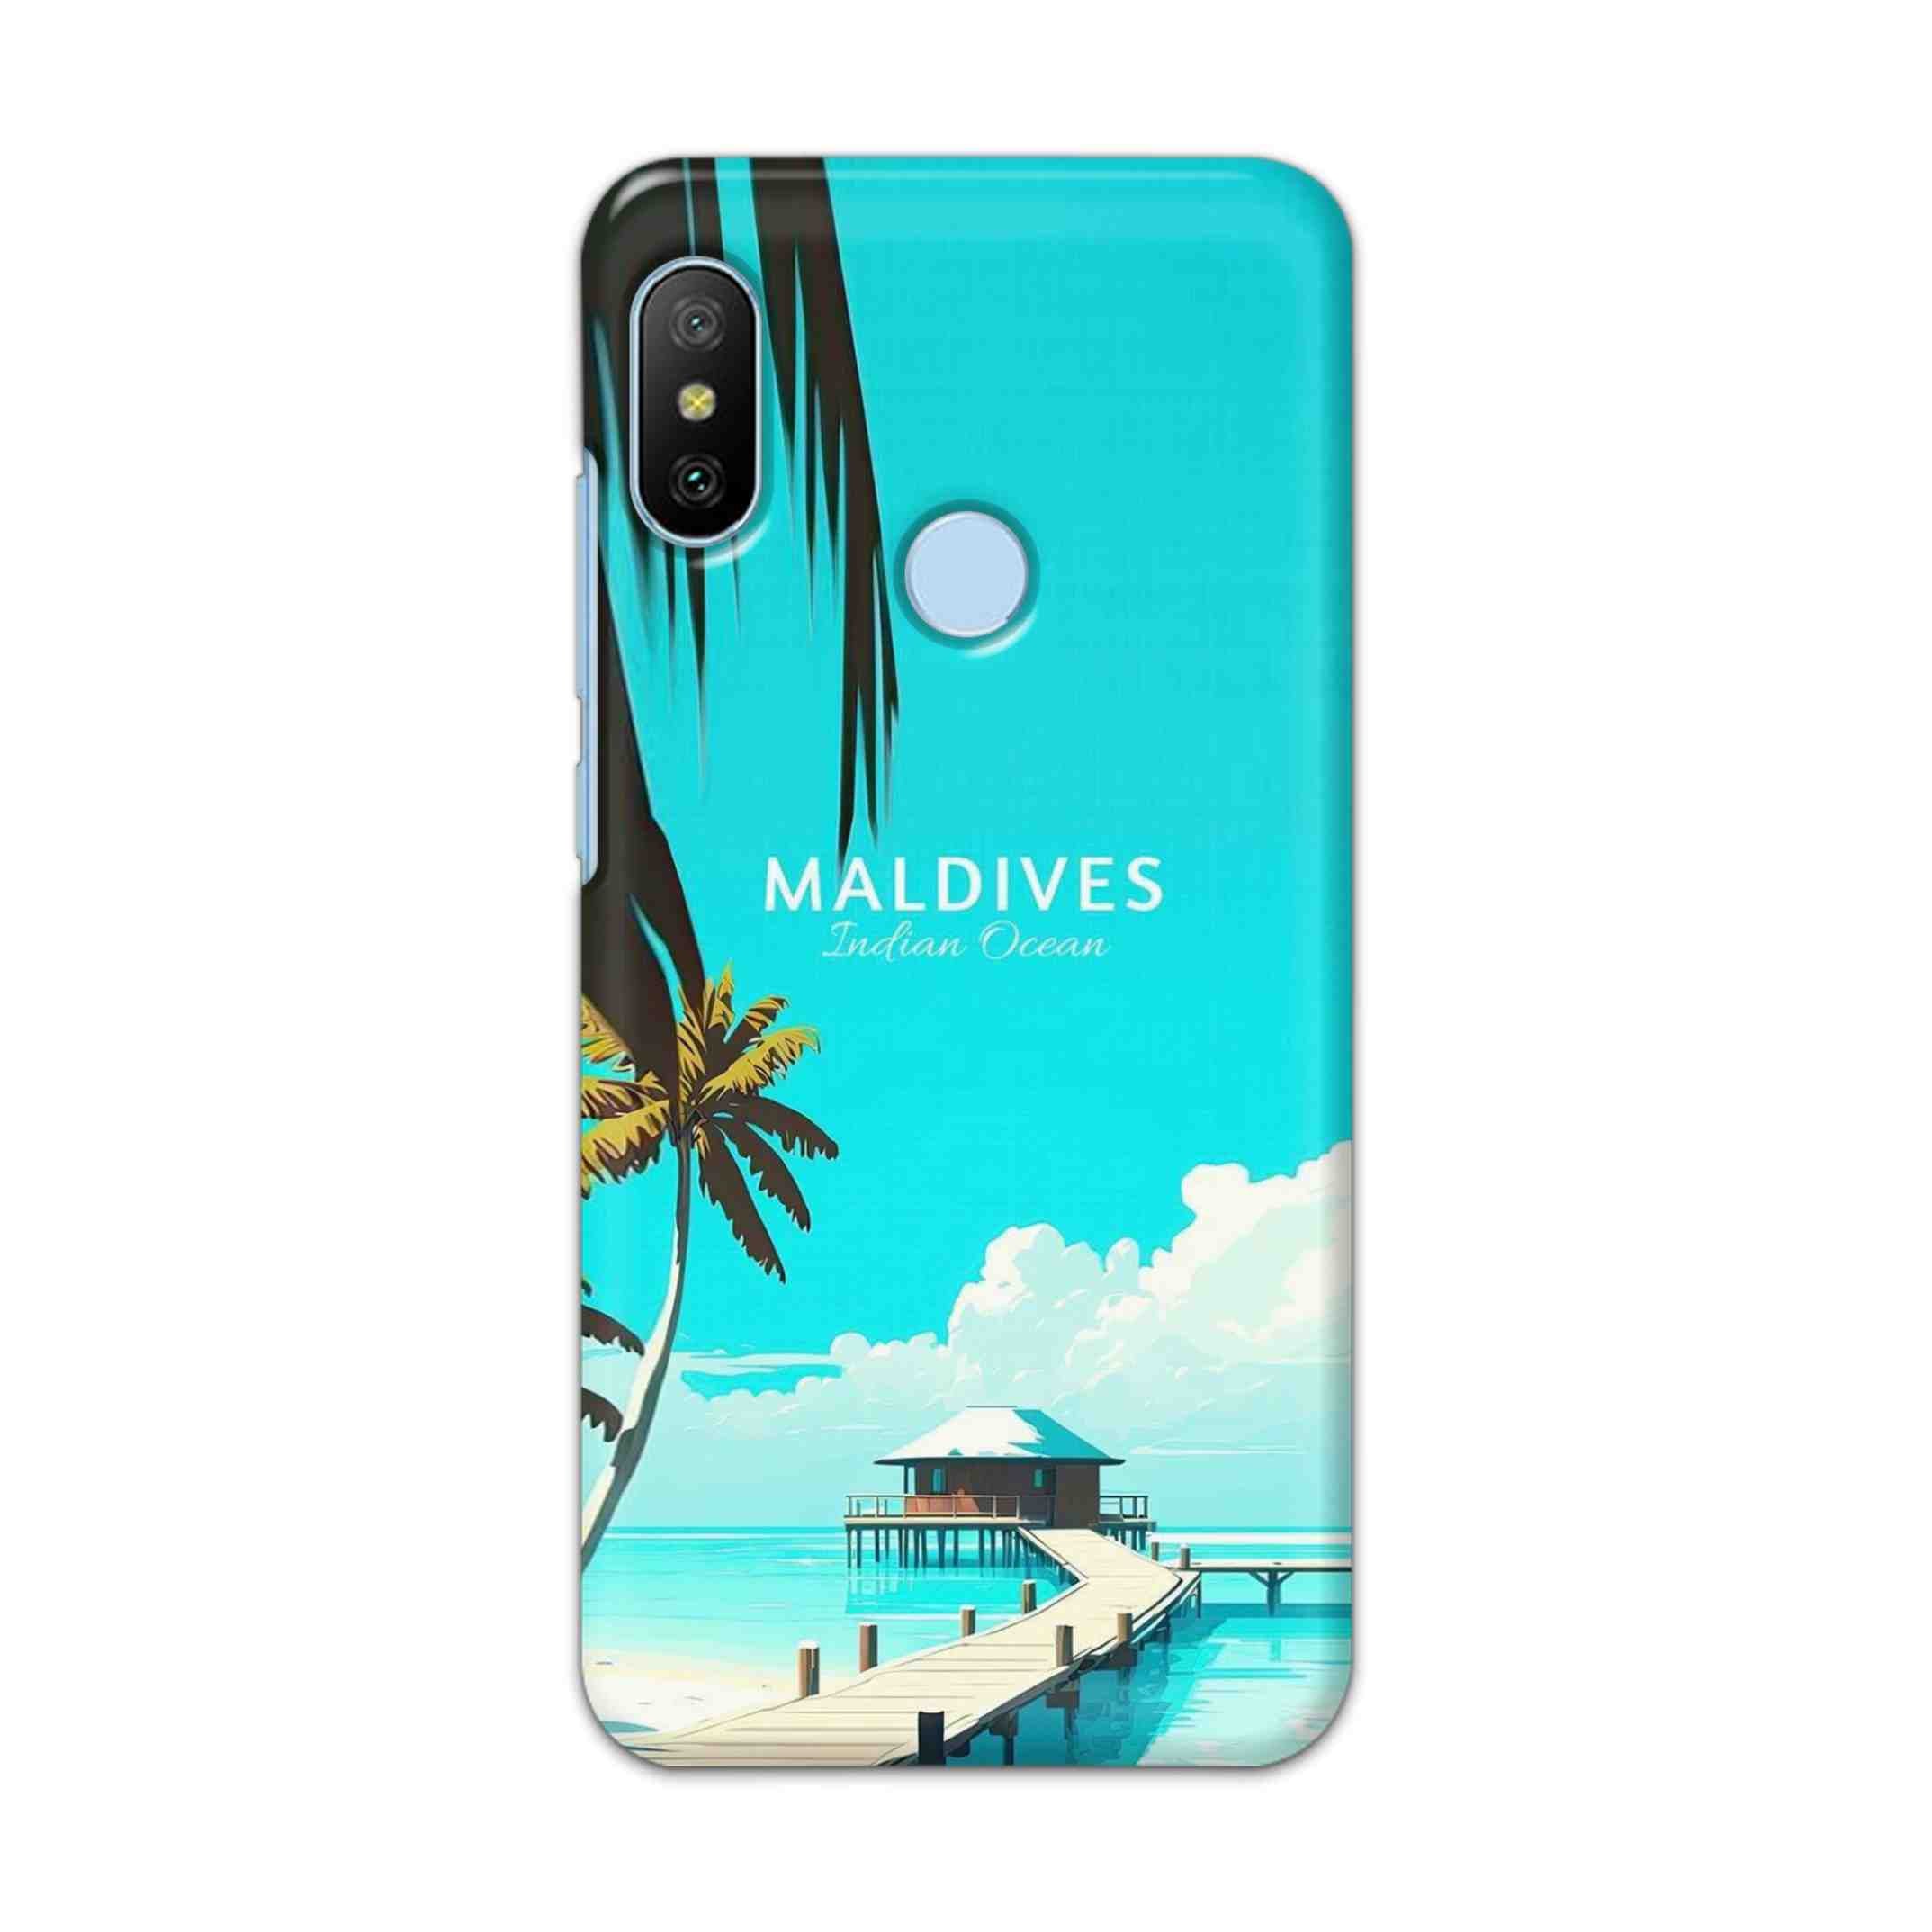 Buy Maldives Hard Back Mobile Phone Case/Cover For Xiaomi Redmi 6 Pro Online